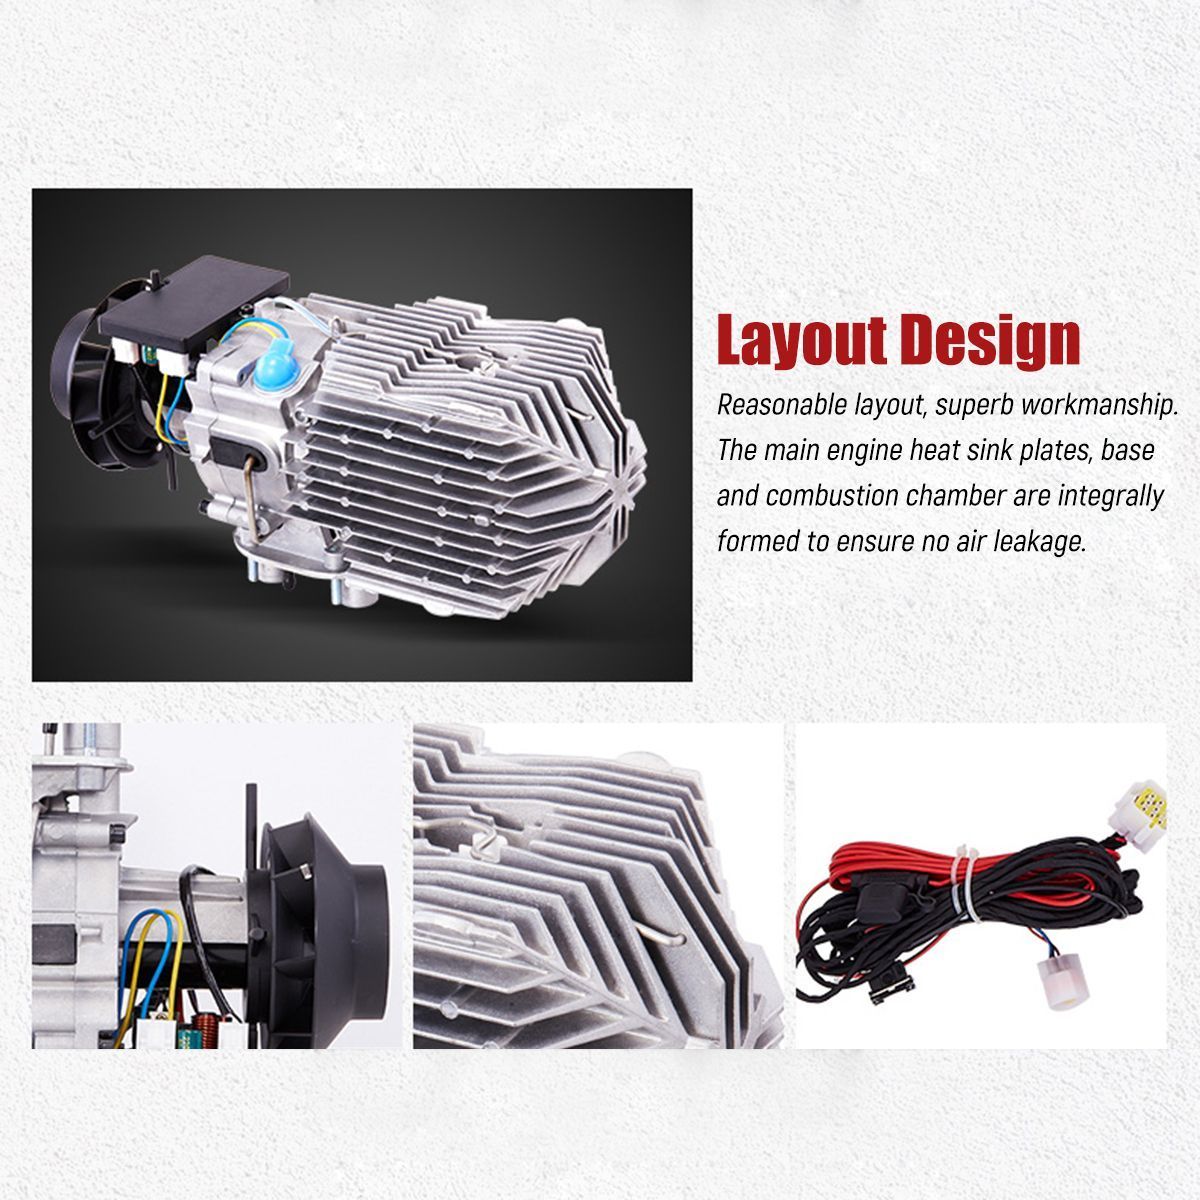 12V-8KW-Diesel-Air-Heater-LCD-Thermostat-For-Car-Truck-Boat-Trailer-Vehicles-Bus-1587806